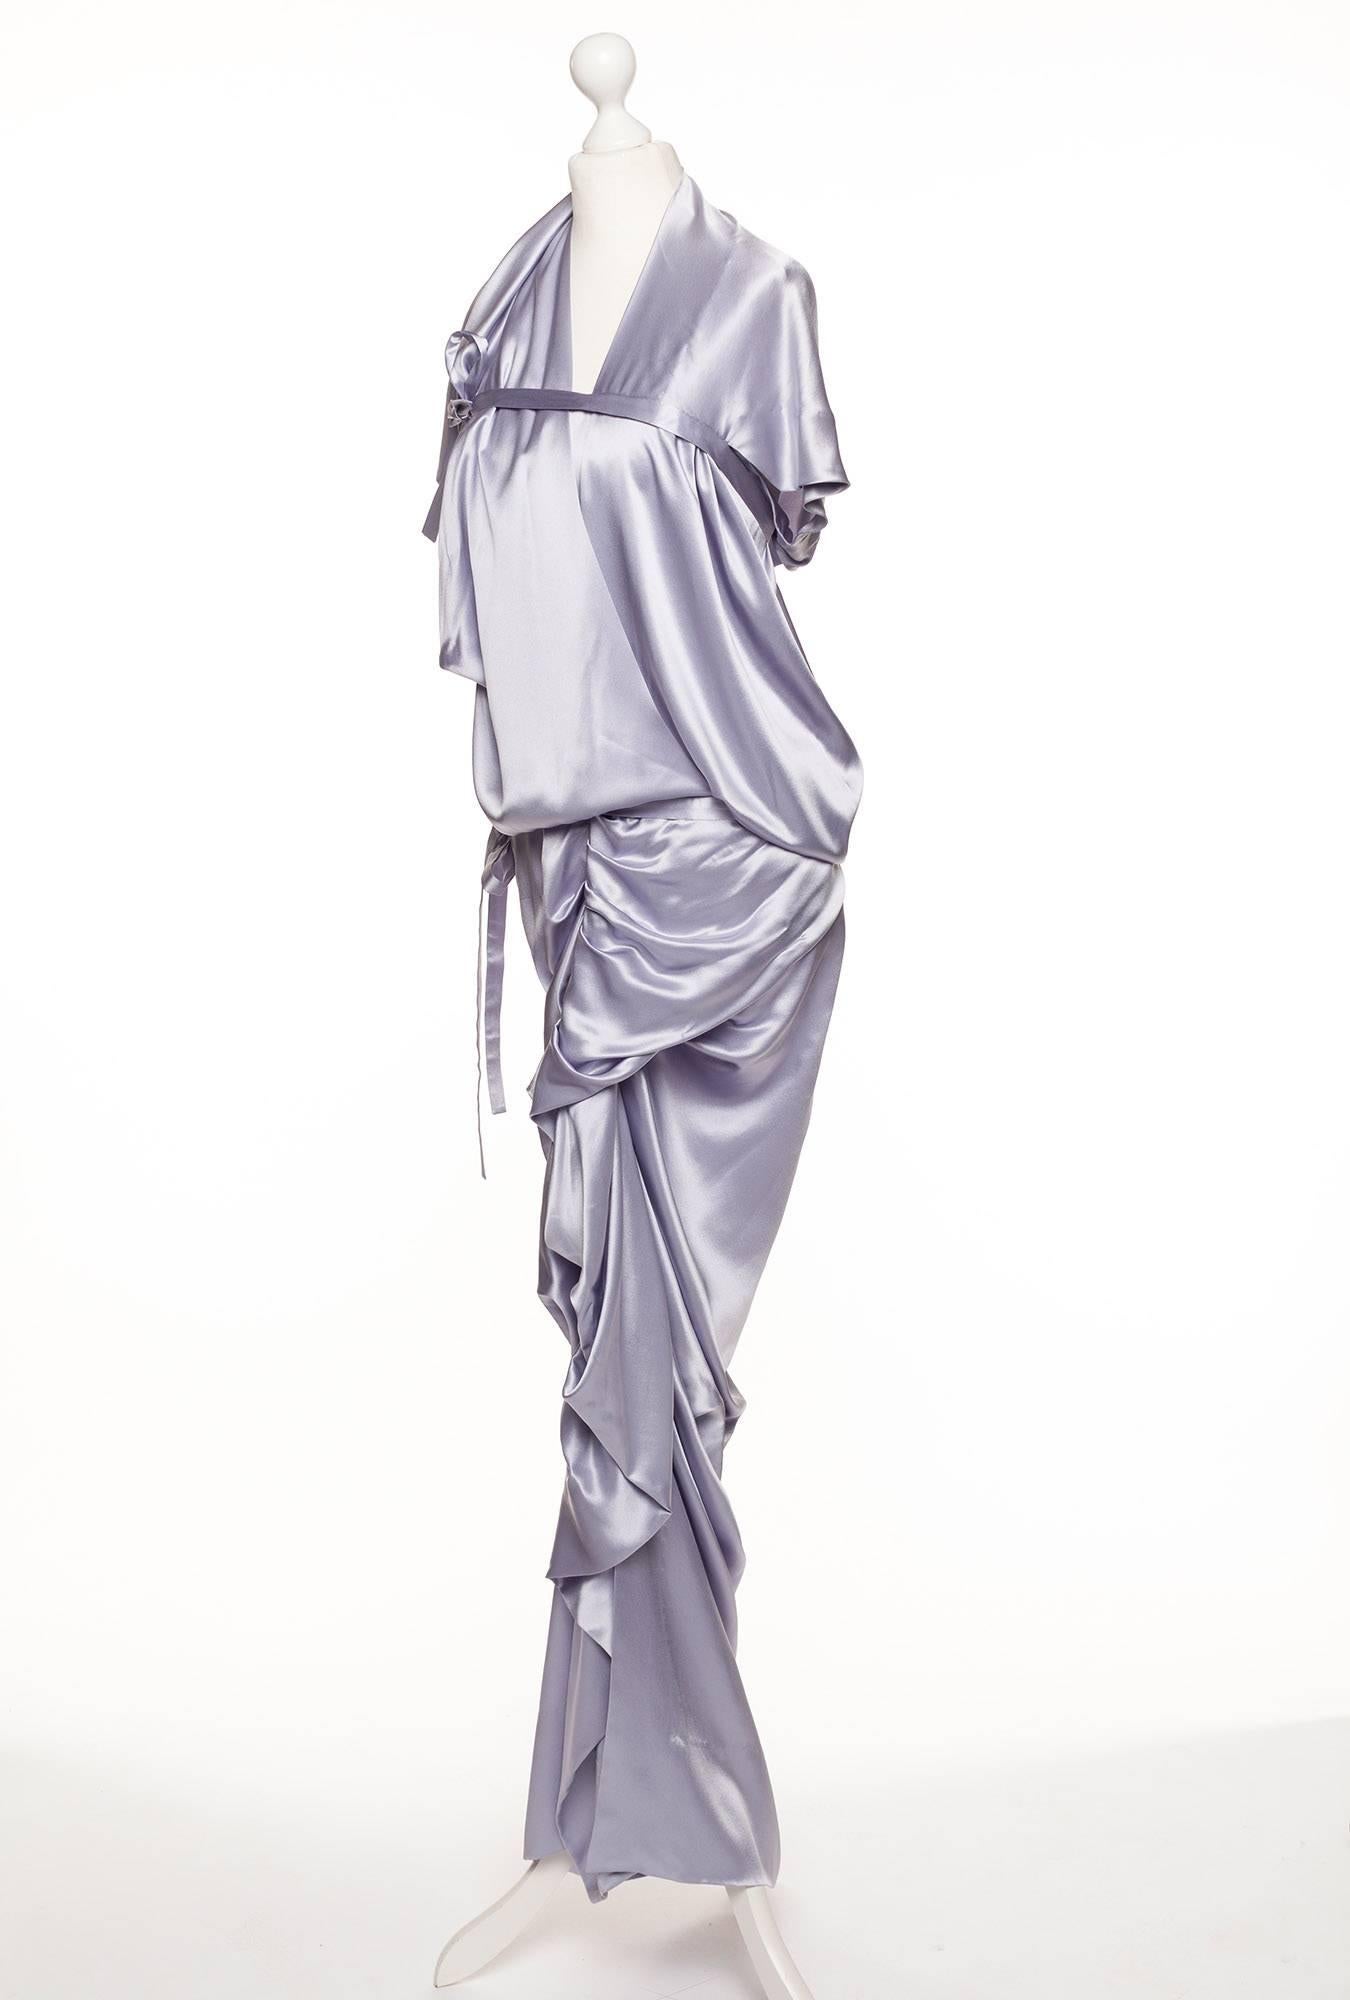 Dress has all the characteristics of a Westwood dress, designed with pure fantasy and shape in mind. Sleeveless with folded and draped fabric creating angular shapes, tie details gives the option to create different lengths and forms.  Perfect for a